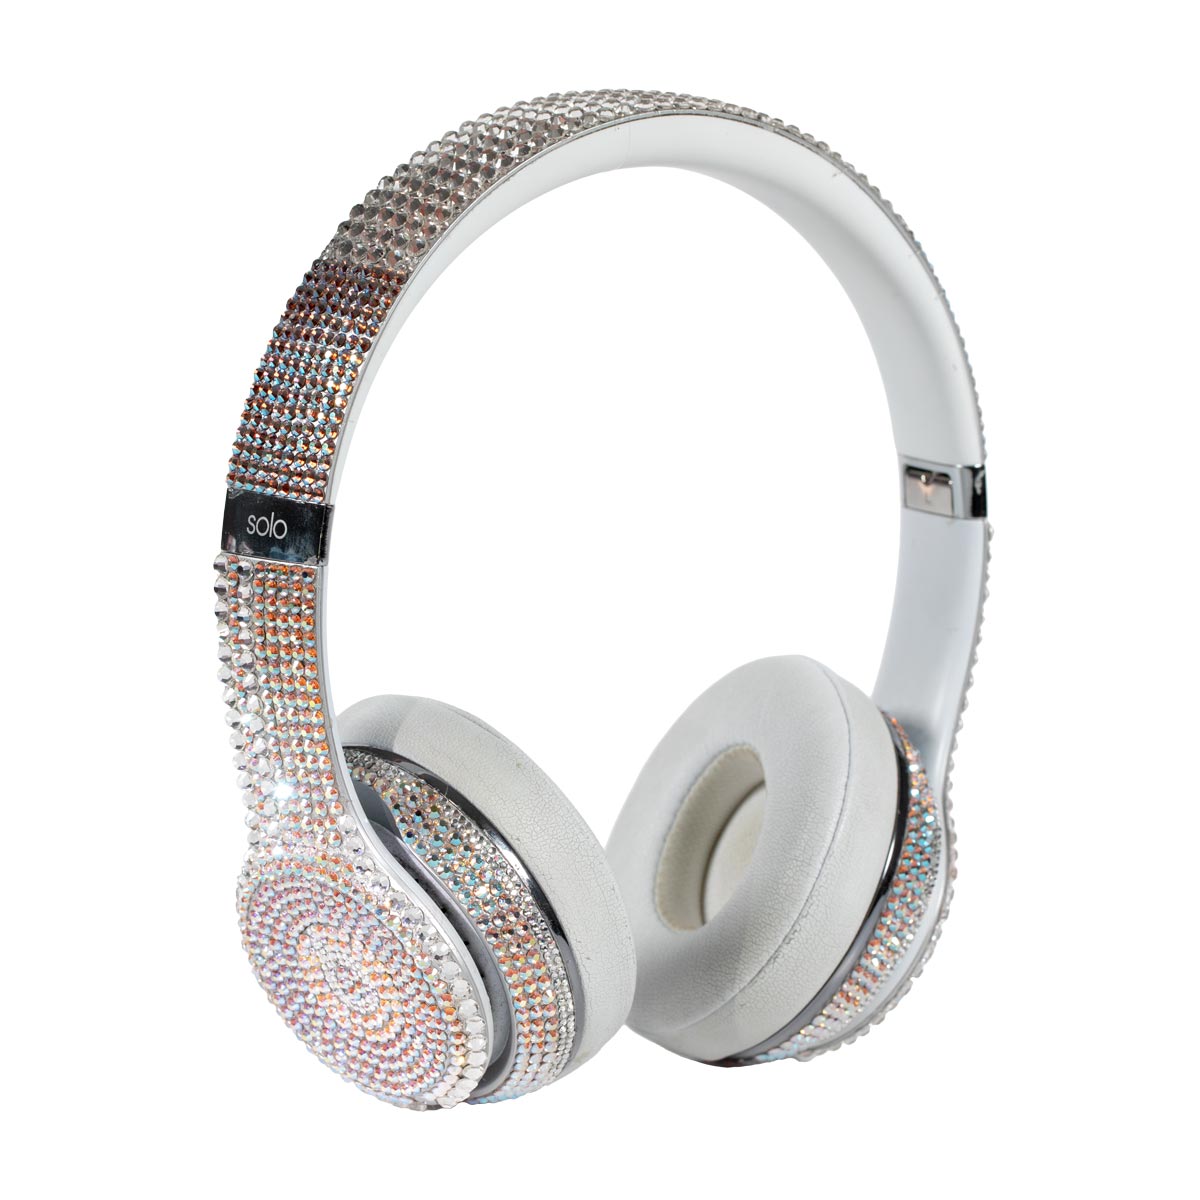 Against the will Resign opening Beats Solo 3 Wireless Headphones Iced - Elite Luxury Gold Plating